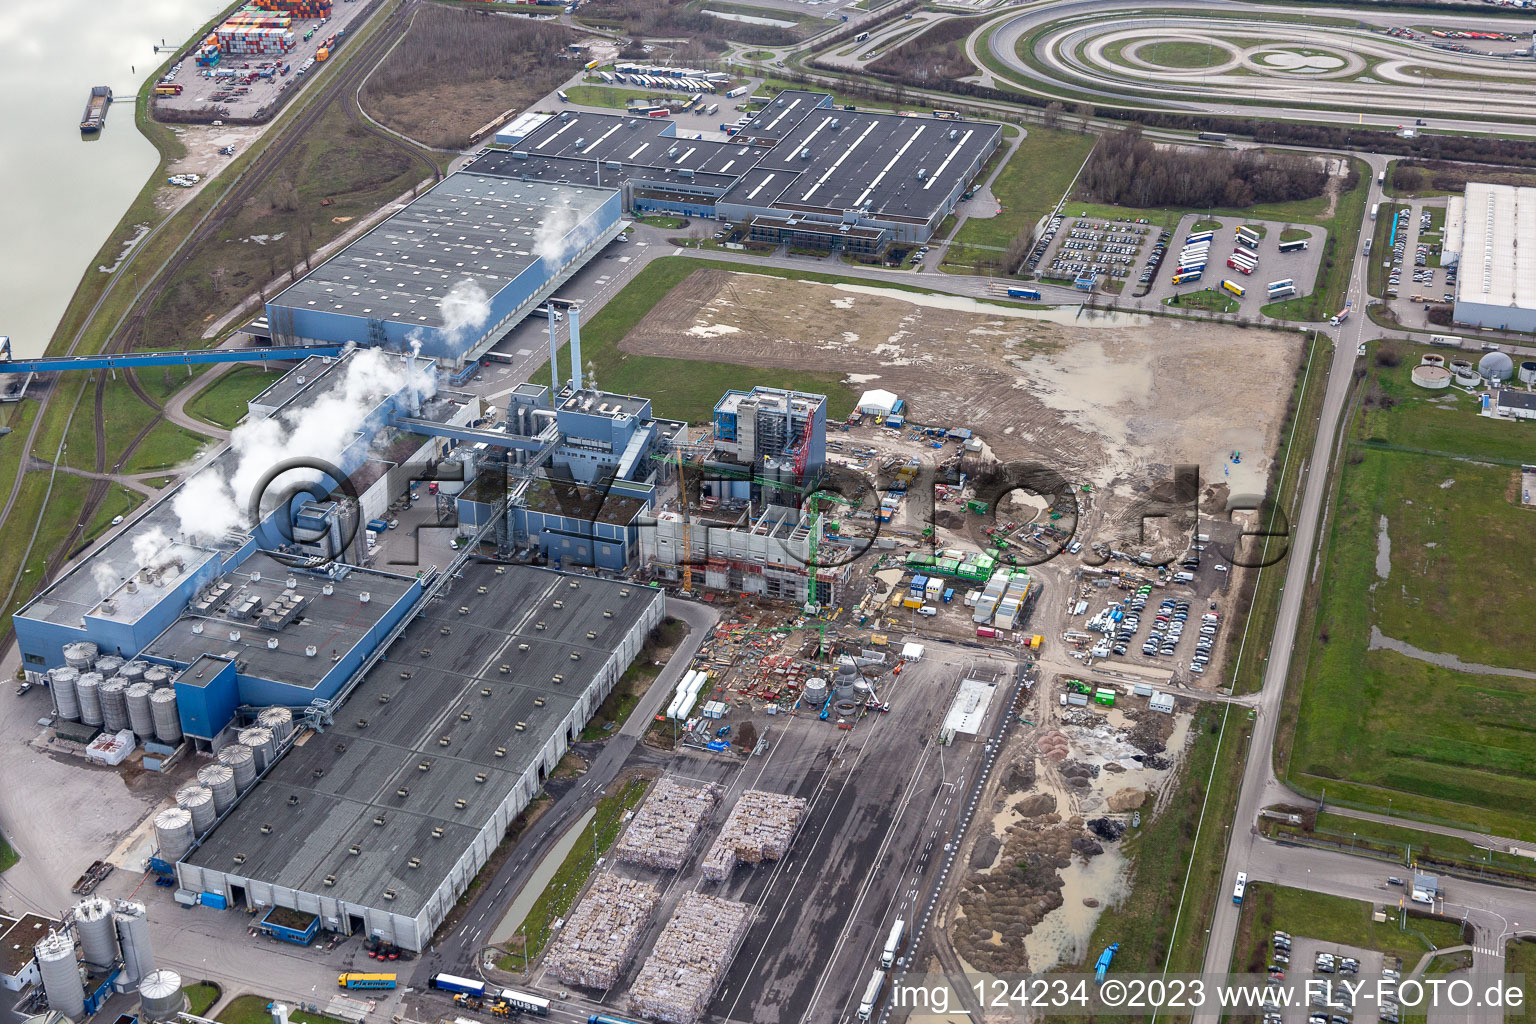 Bird's eye view of Construction of the new gas- hydrogen-power plant at paer mill Papierfabrik Palm GmbH & Co. KG in the district Industriegebiet Woerth-Oberwald in Woerth am Rhein in the state Rhineland-Palatinate